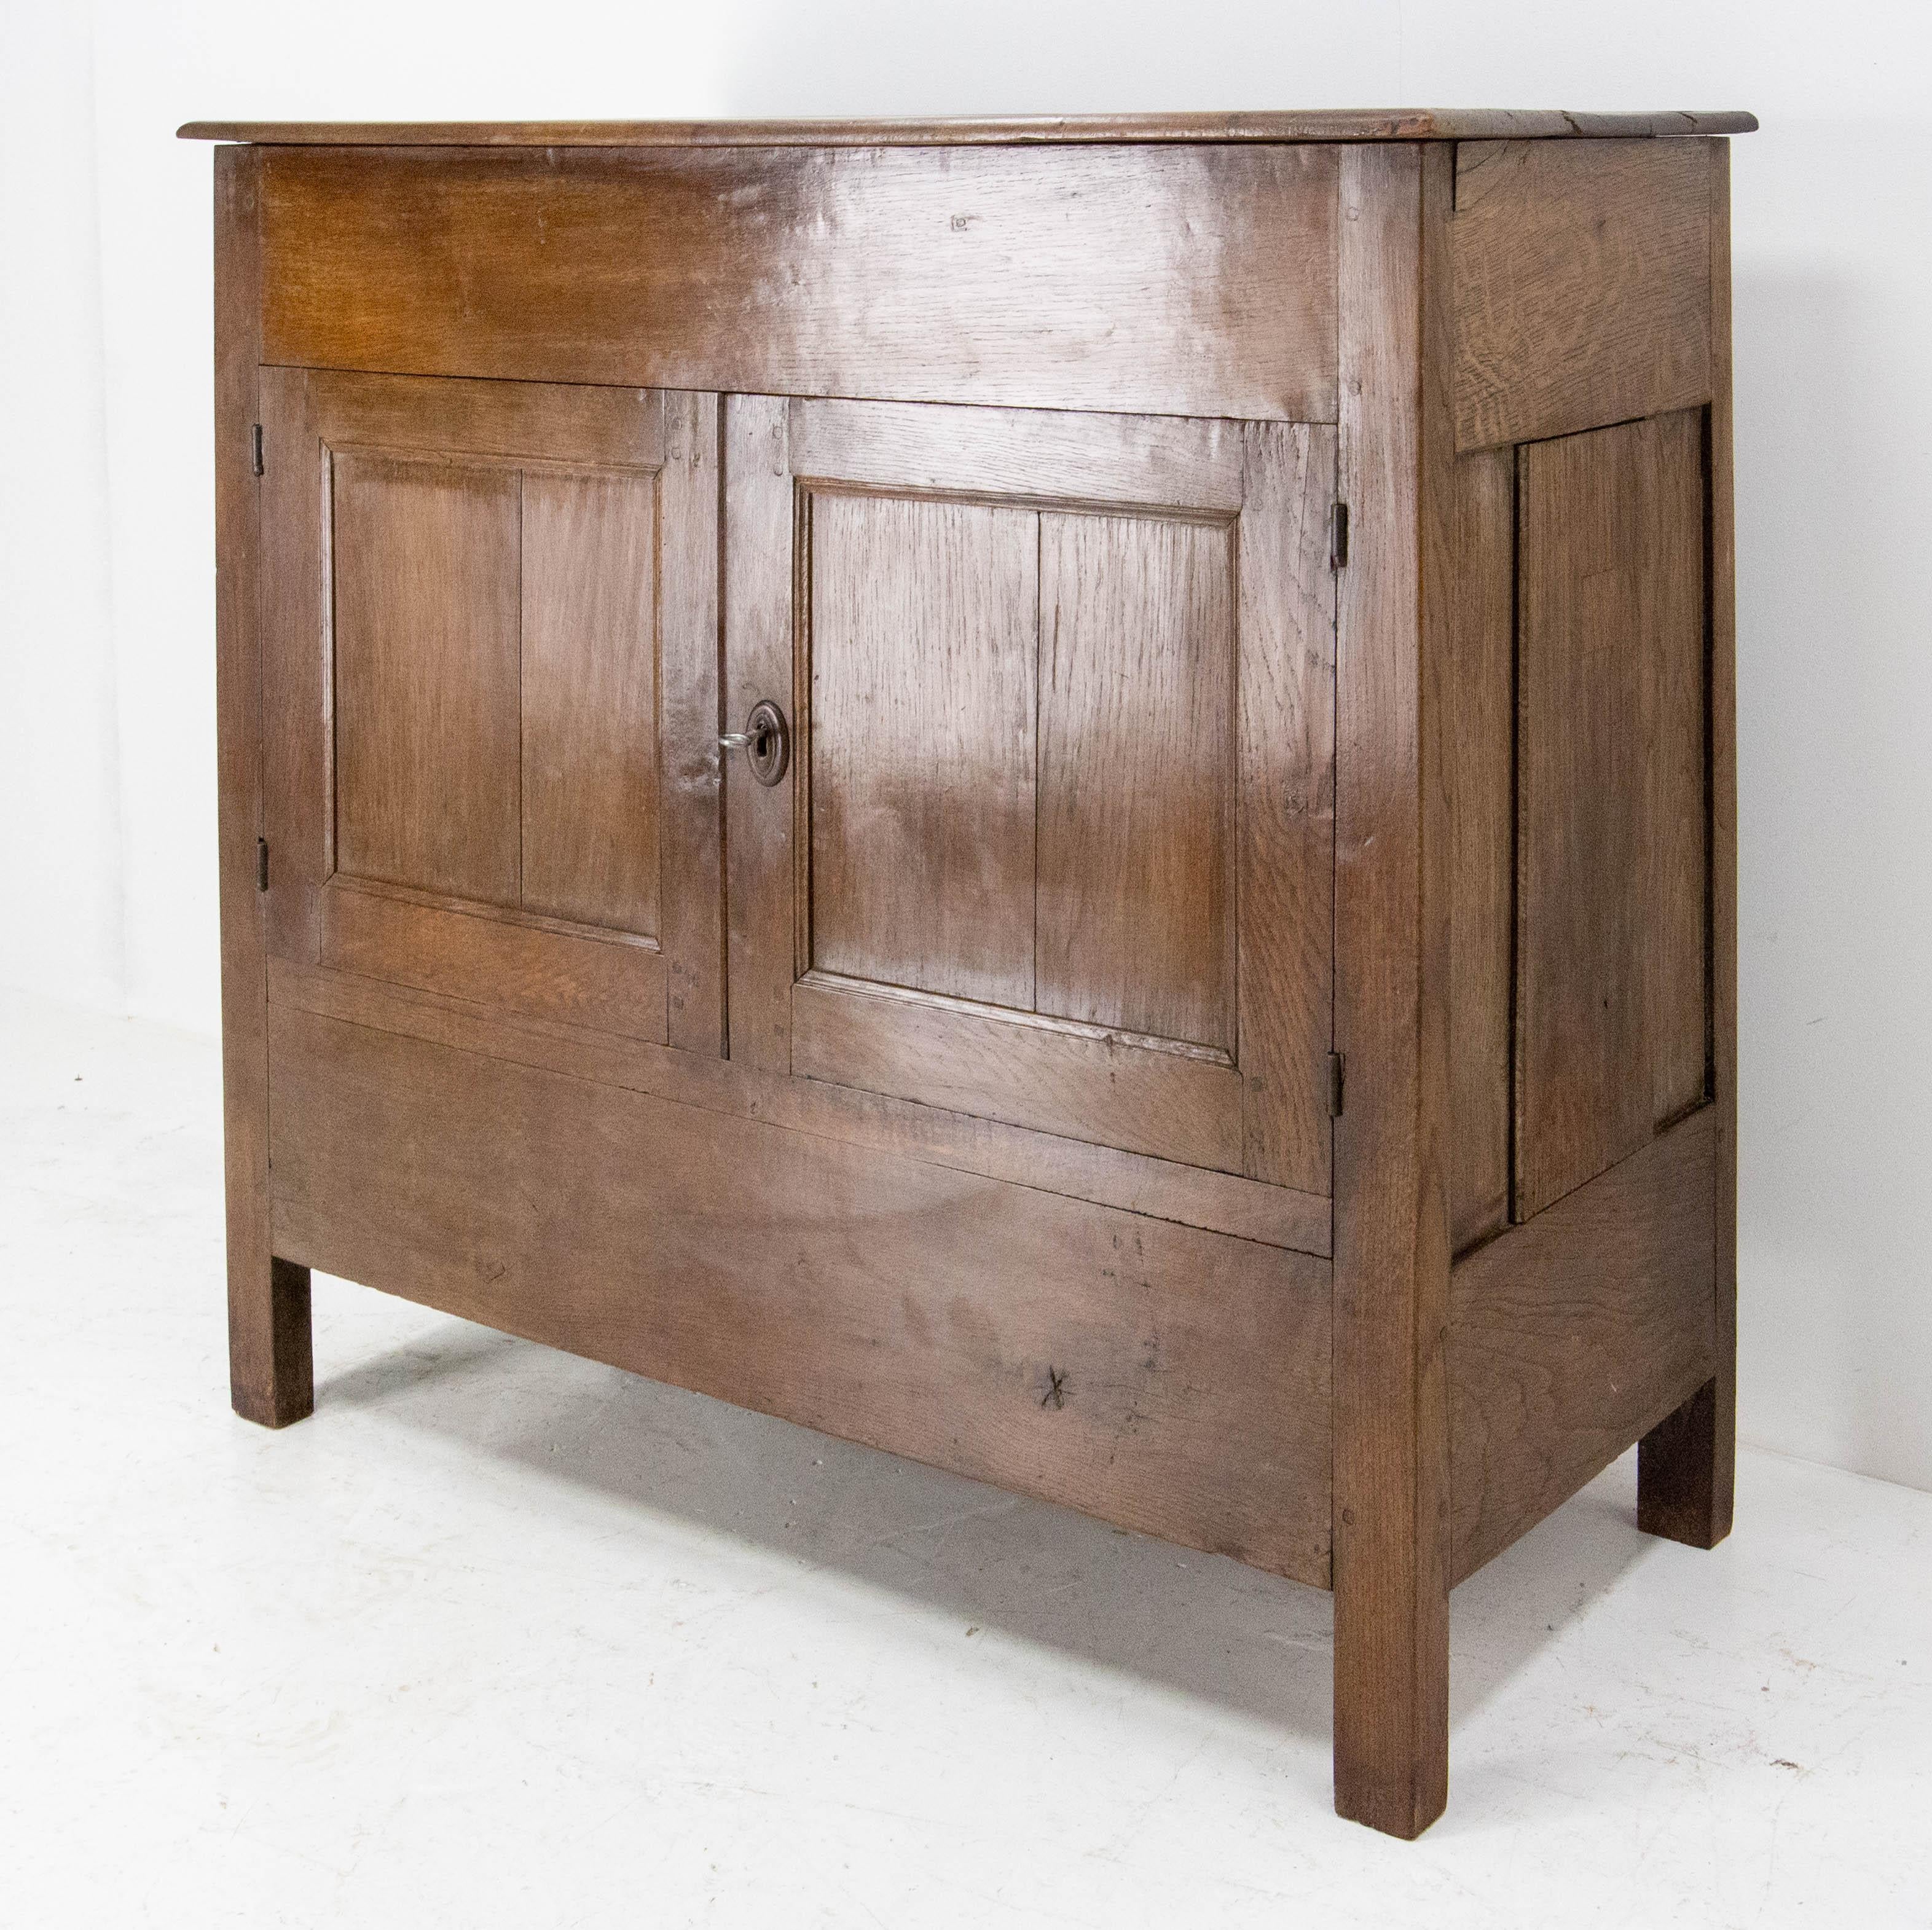 French Provincial French Sideboard Credenza Provincial Oak Buffet Cabinet, Mid-19th Century